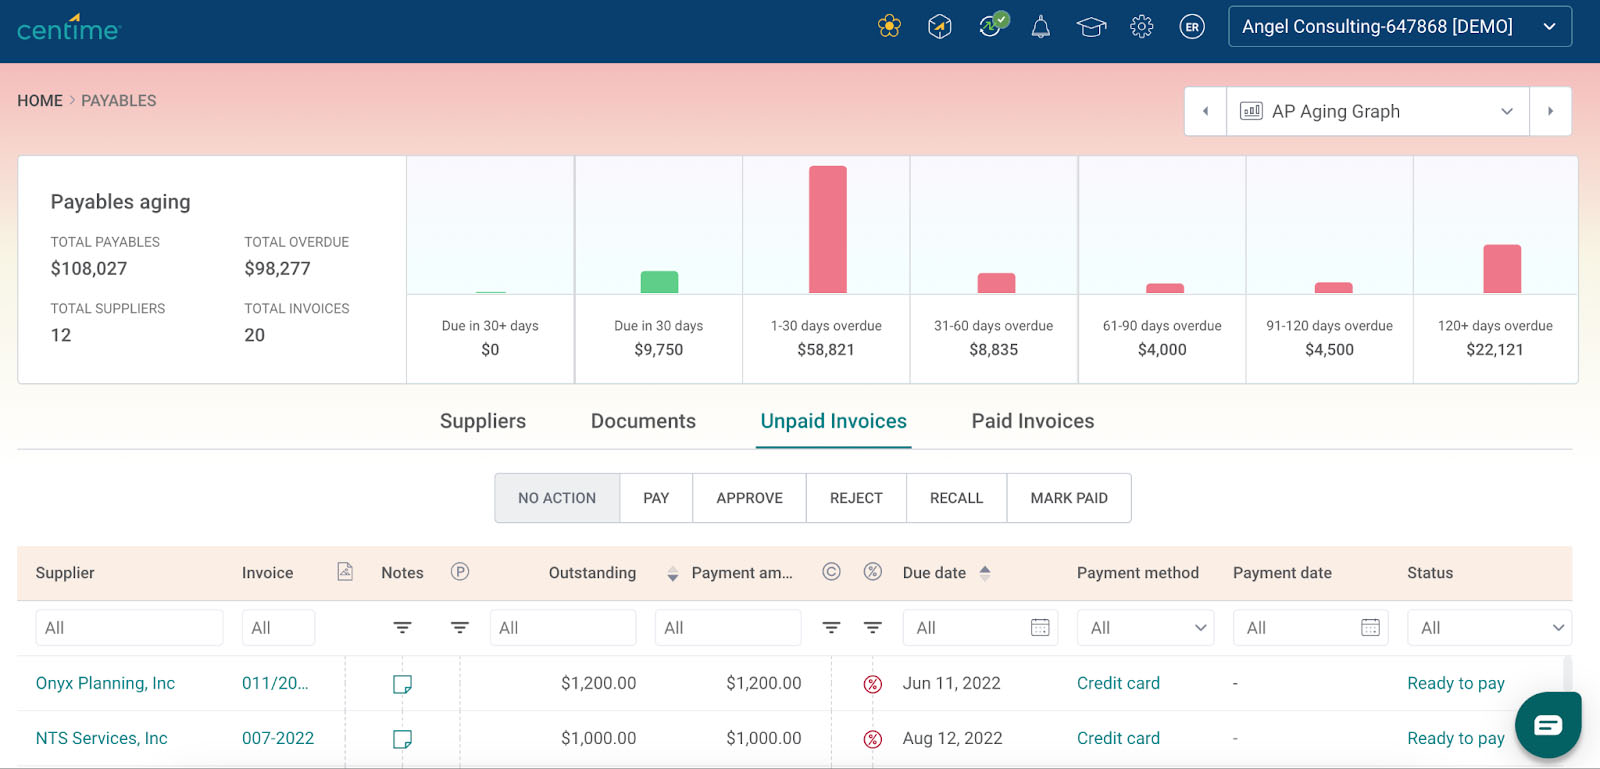 Image showing Centime's accounts payable module.